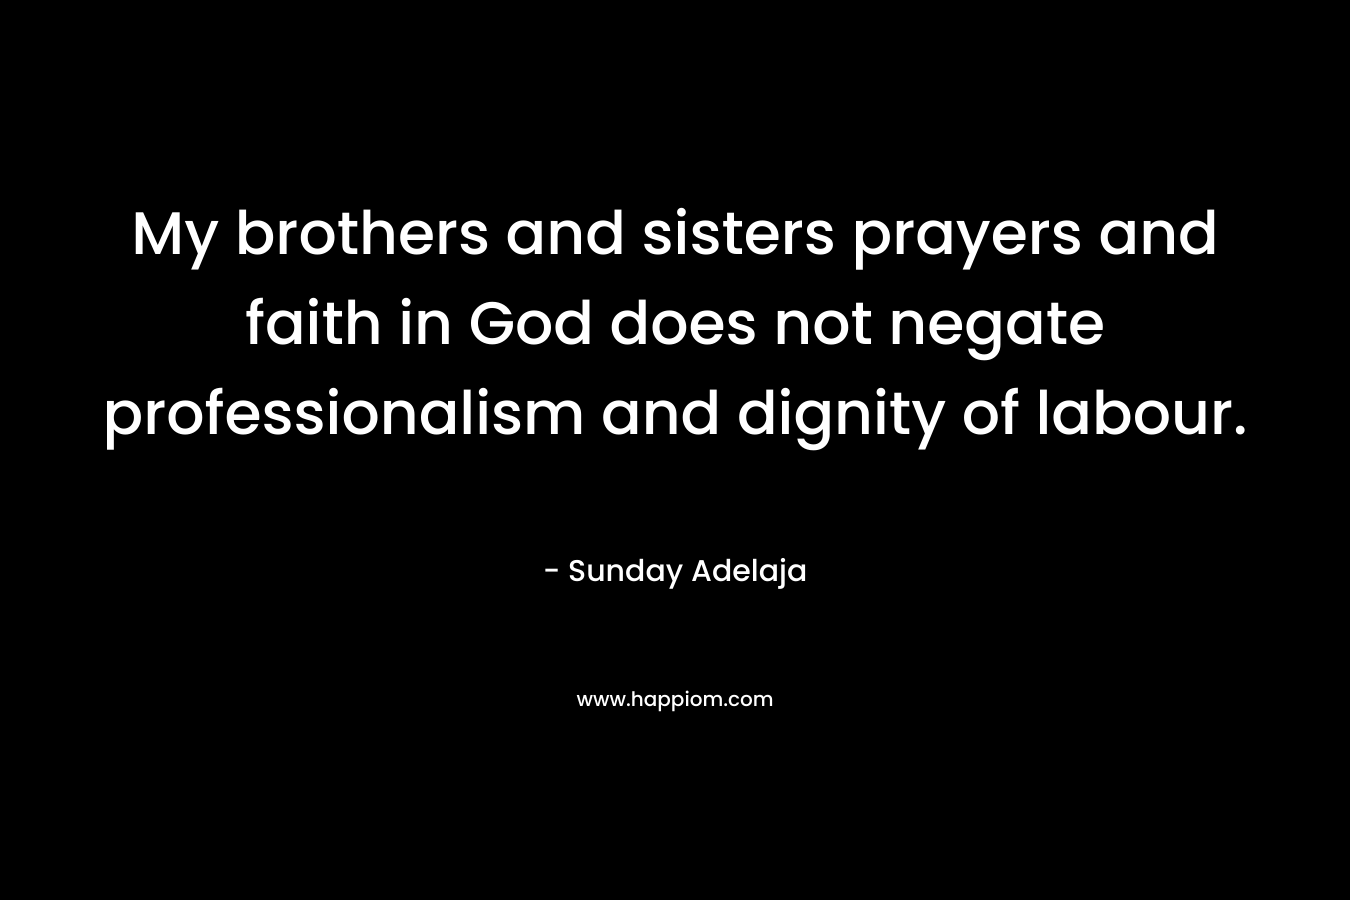 My brothers and sisters prayers and faith in God does not negate professionalism and dignity of labour.